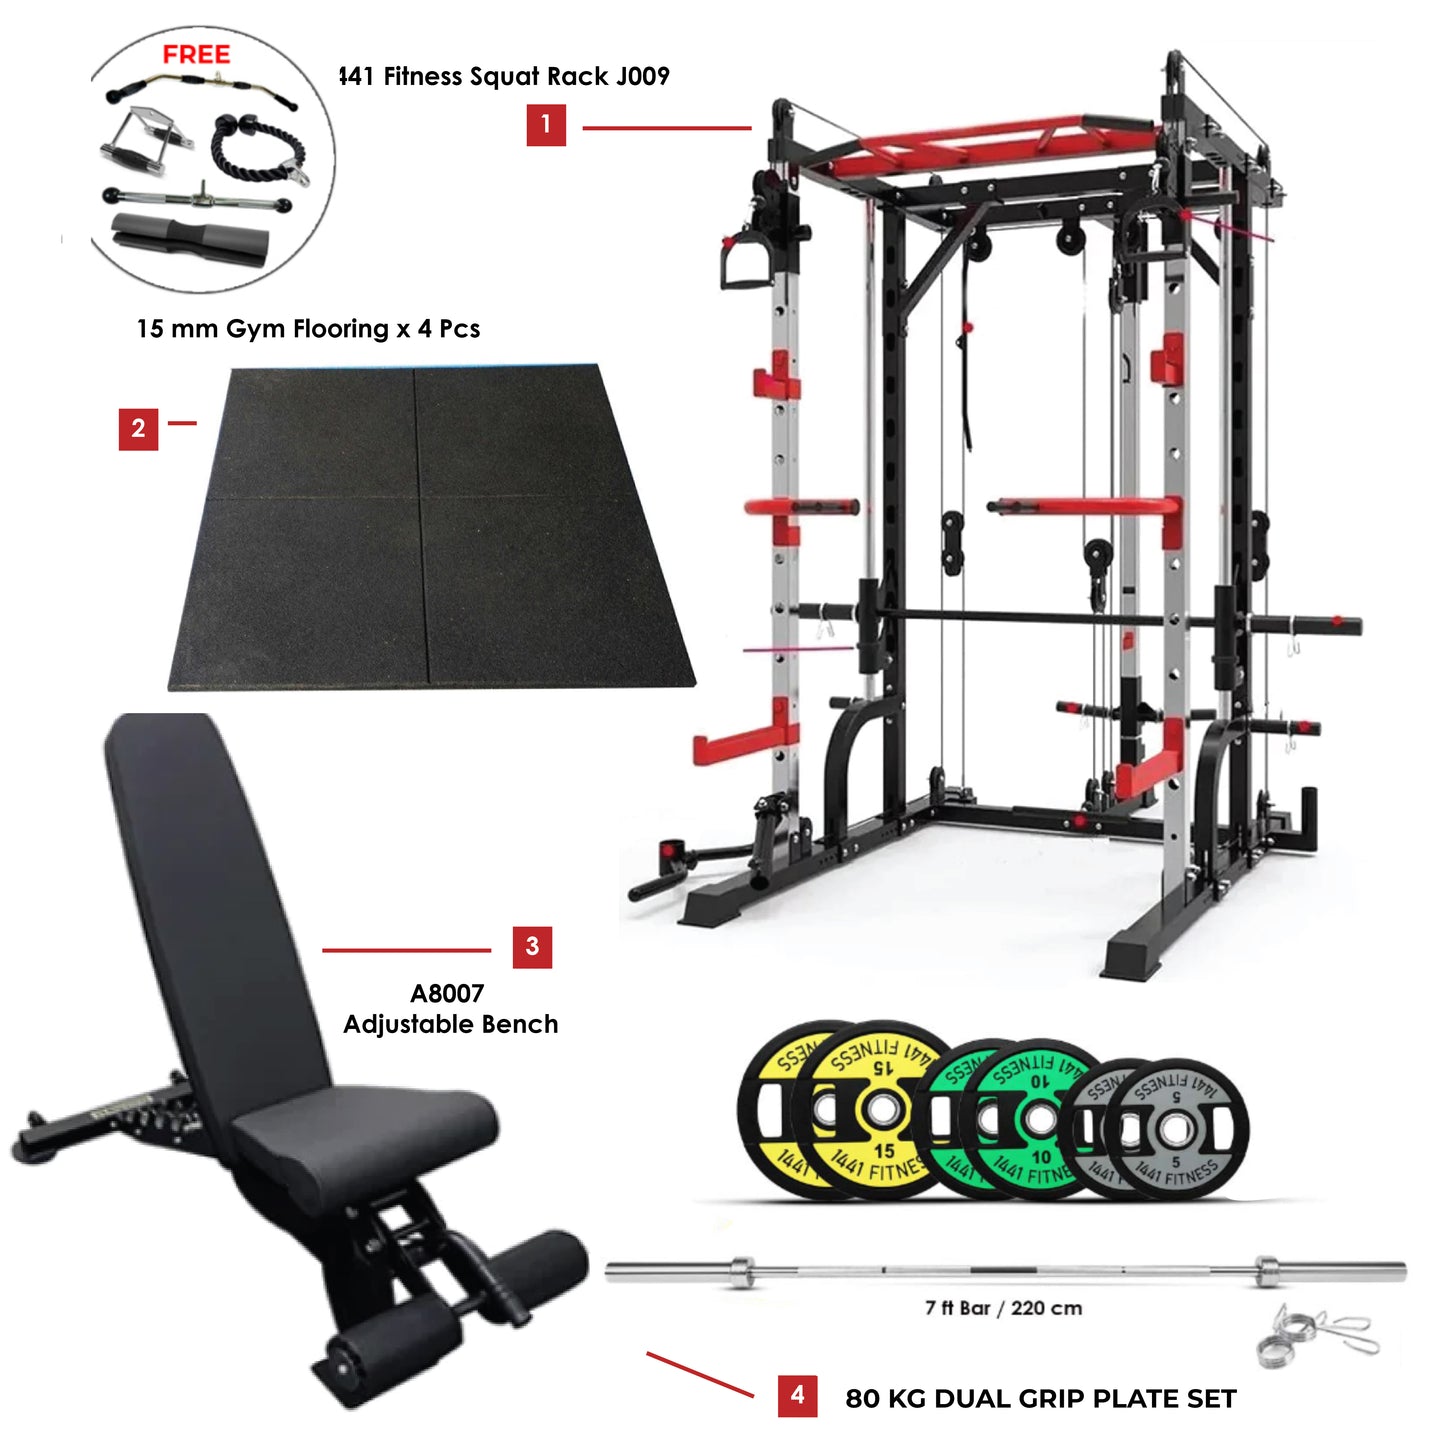 Combo Deal | 1441 Fitness Smith Machine with Functional Trainer J009 + 7 Ft Bar with 80 Kg Set Weight Plate Set + Adjustable Bench A8007 + 15 MM Flooring